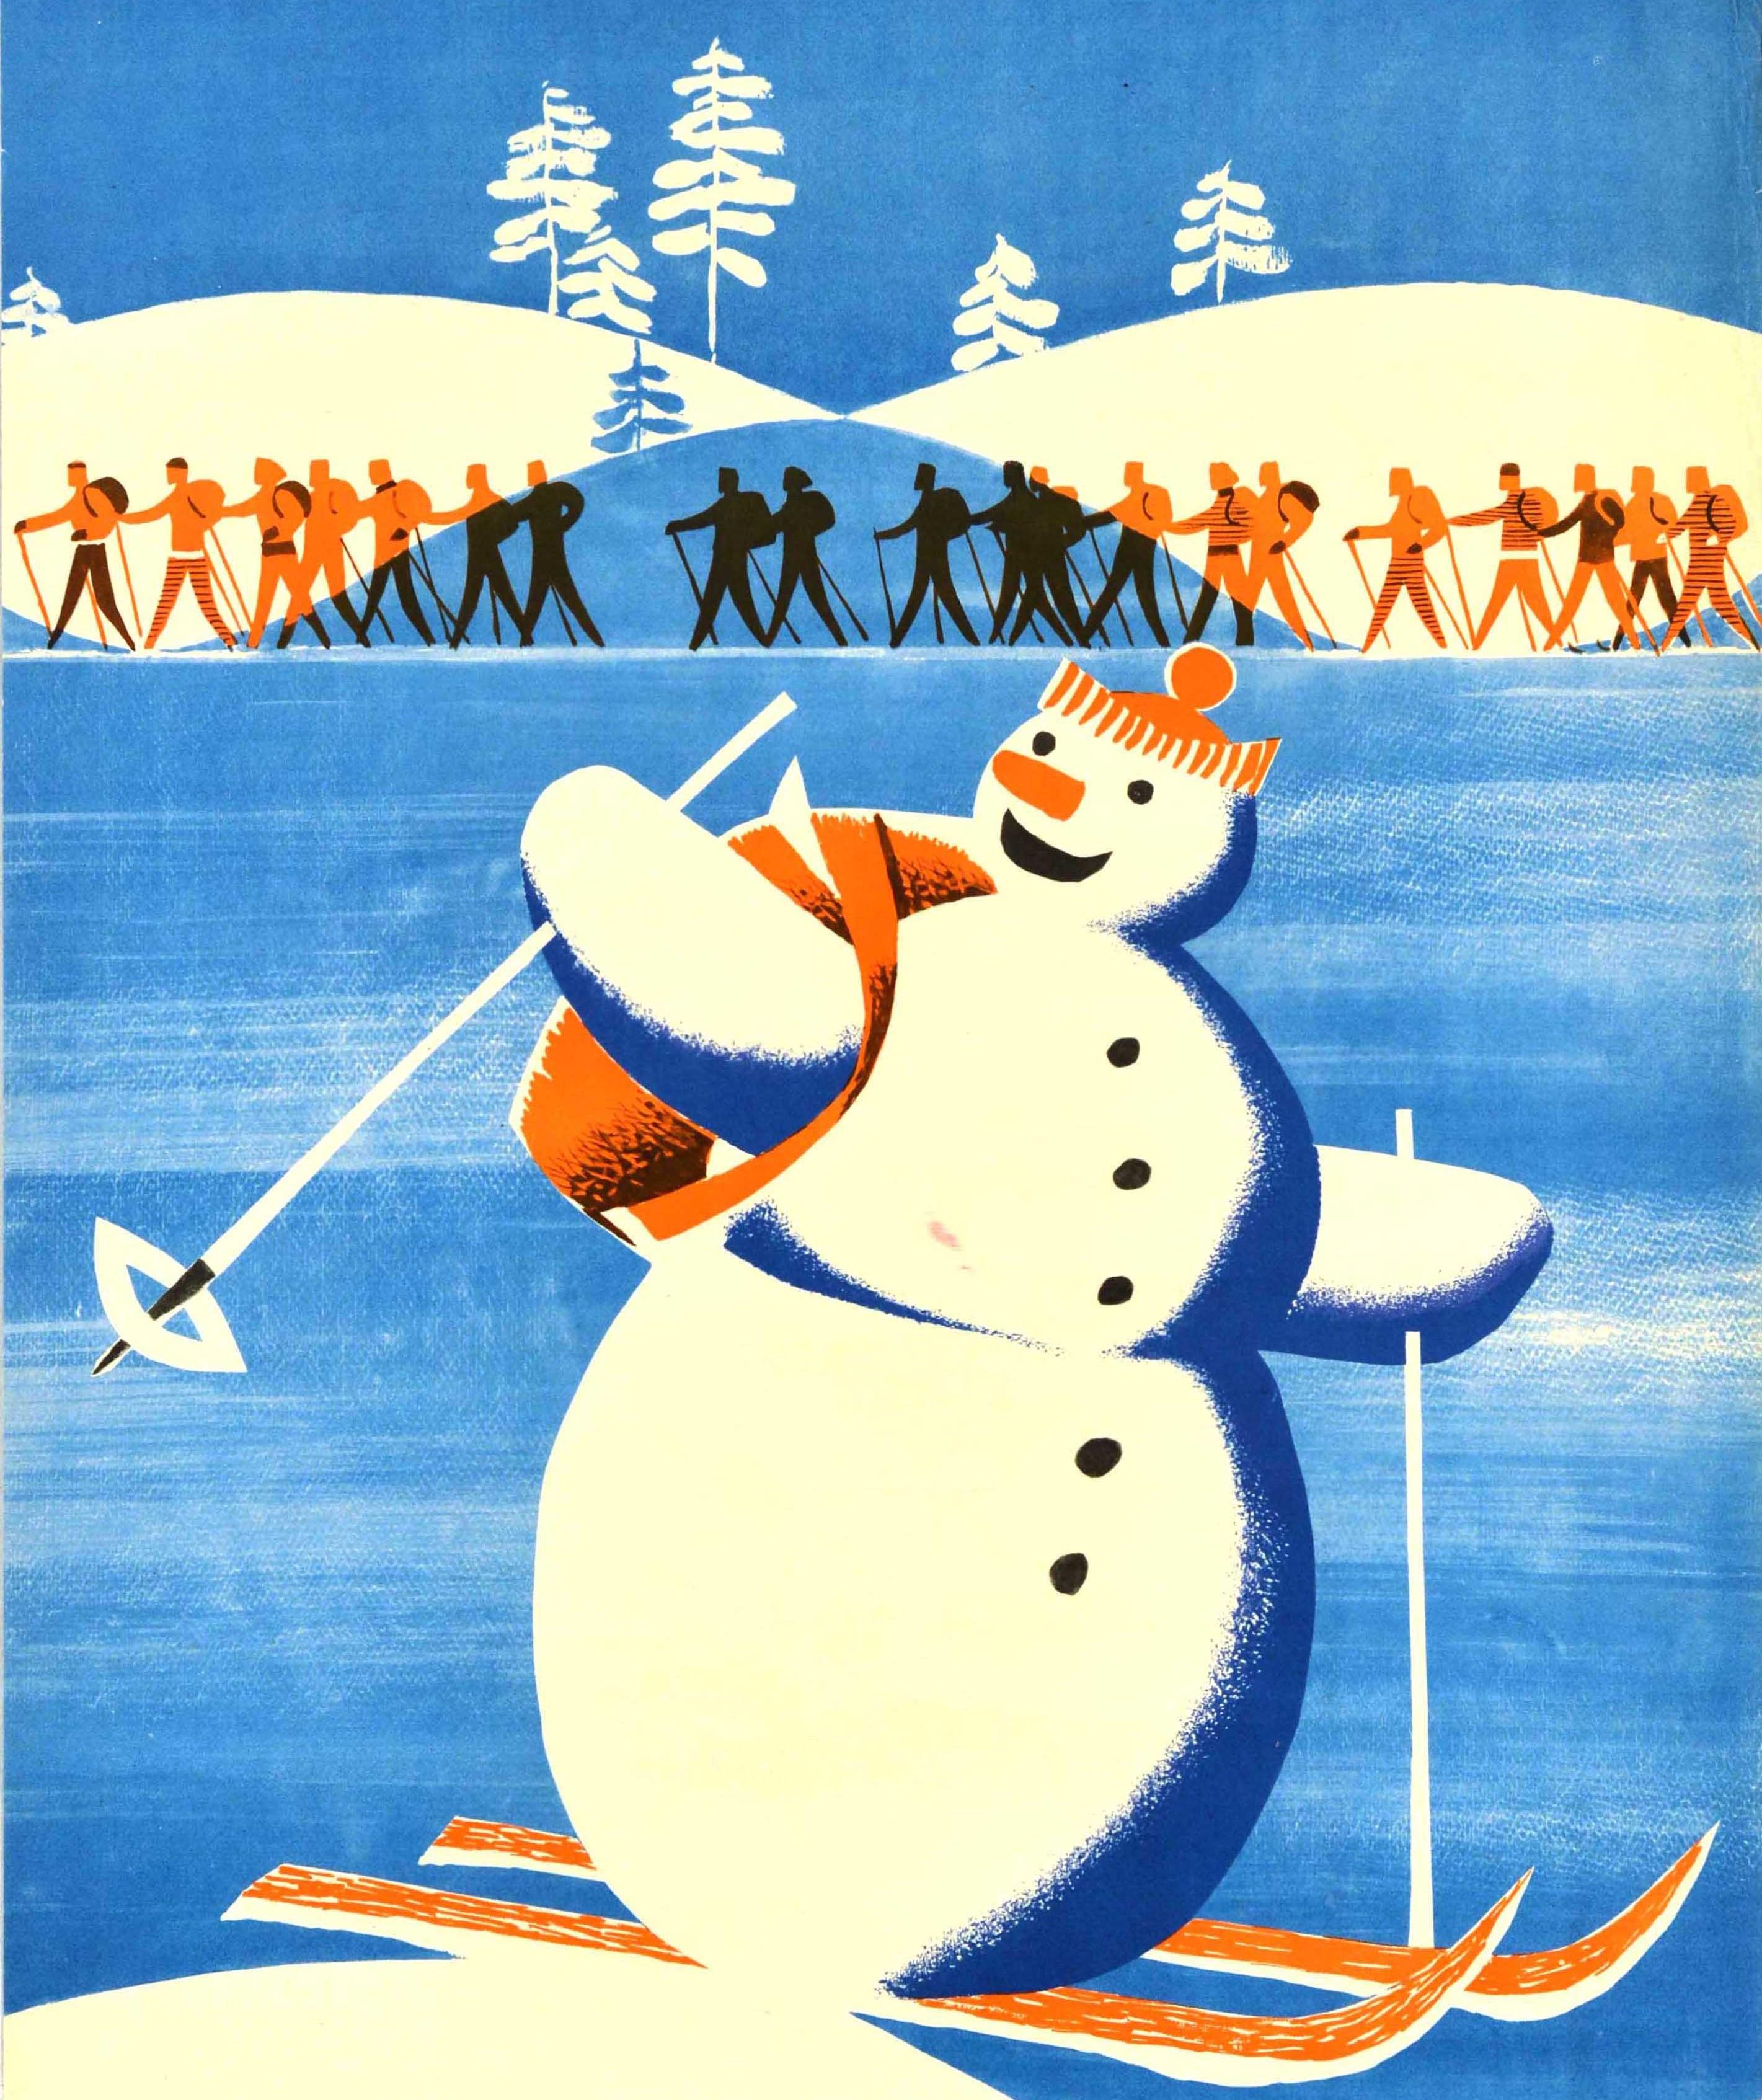 Original vintage Soviet travel poster featuring a fun illustration of a snowman on skis waving at people going cross-country skiing in front of snow topped hills and trees in the background, the caption below the image reads: Tourists get on skis! /